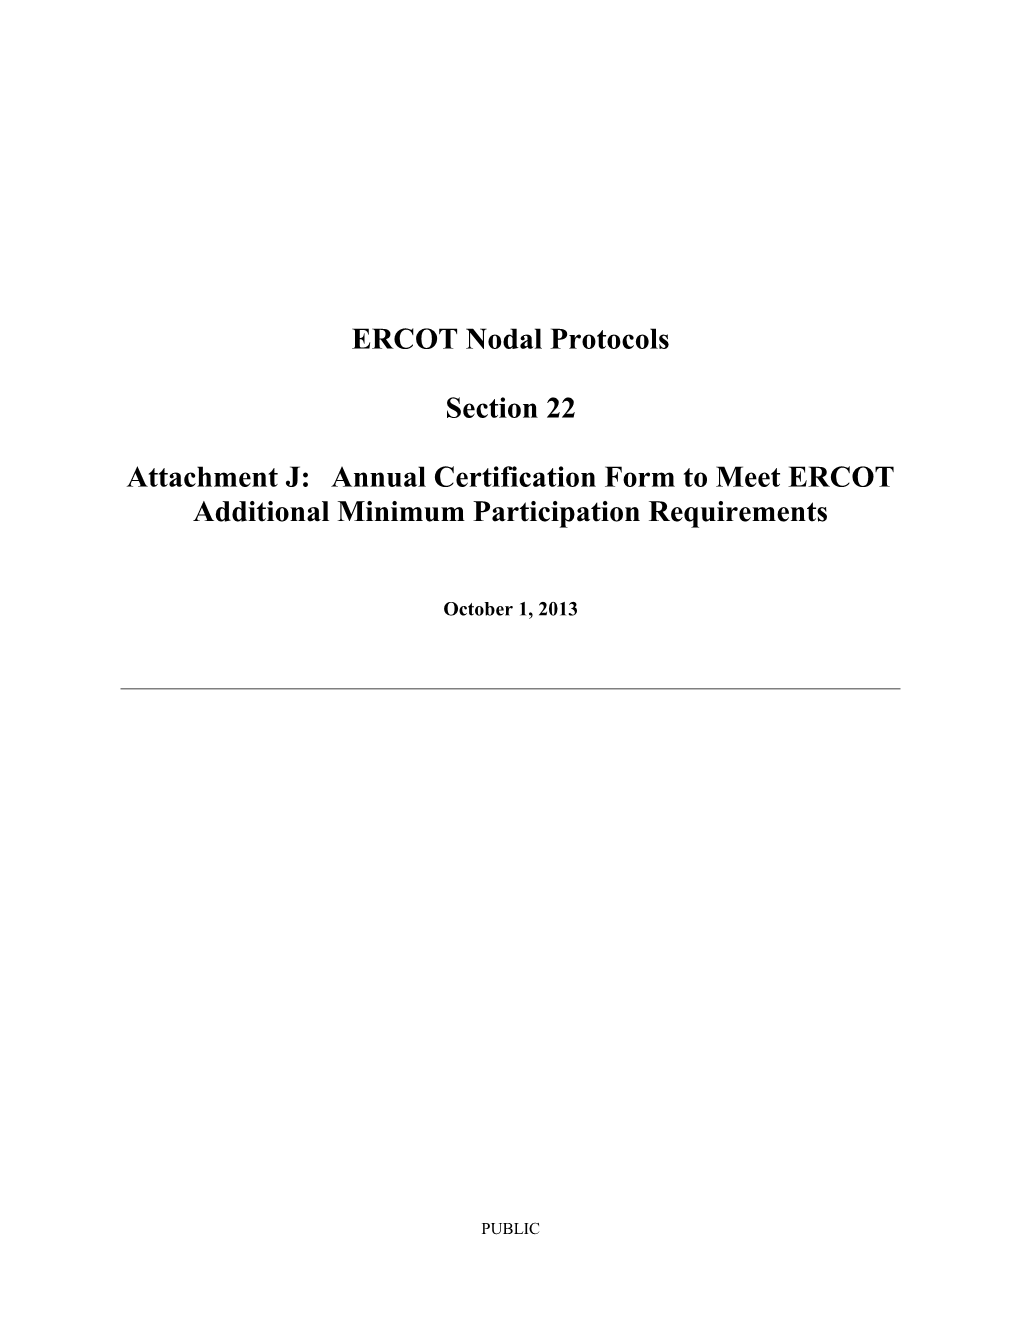 Attachment J: Annual Certification Form to Meet ERCOT Additional Minimum Participation